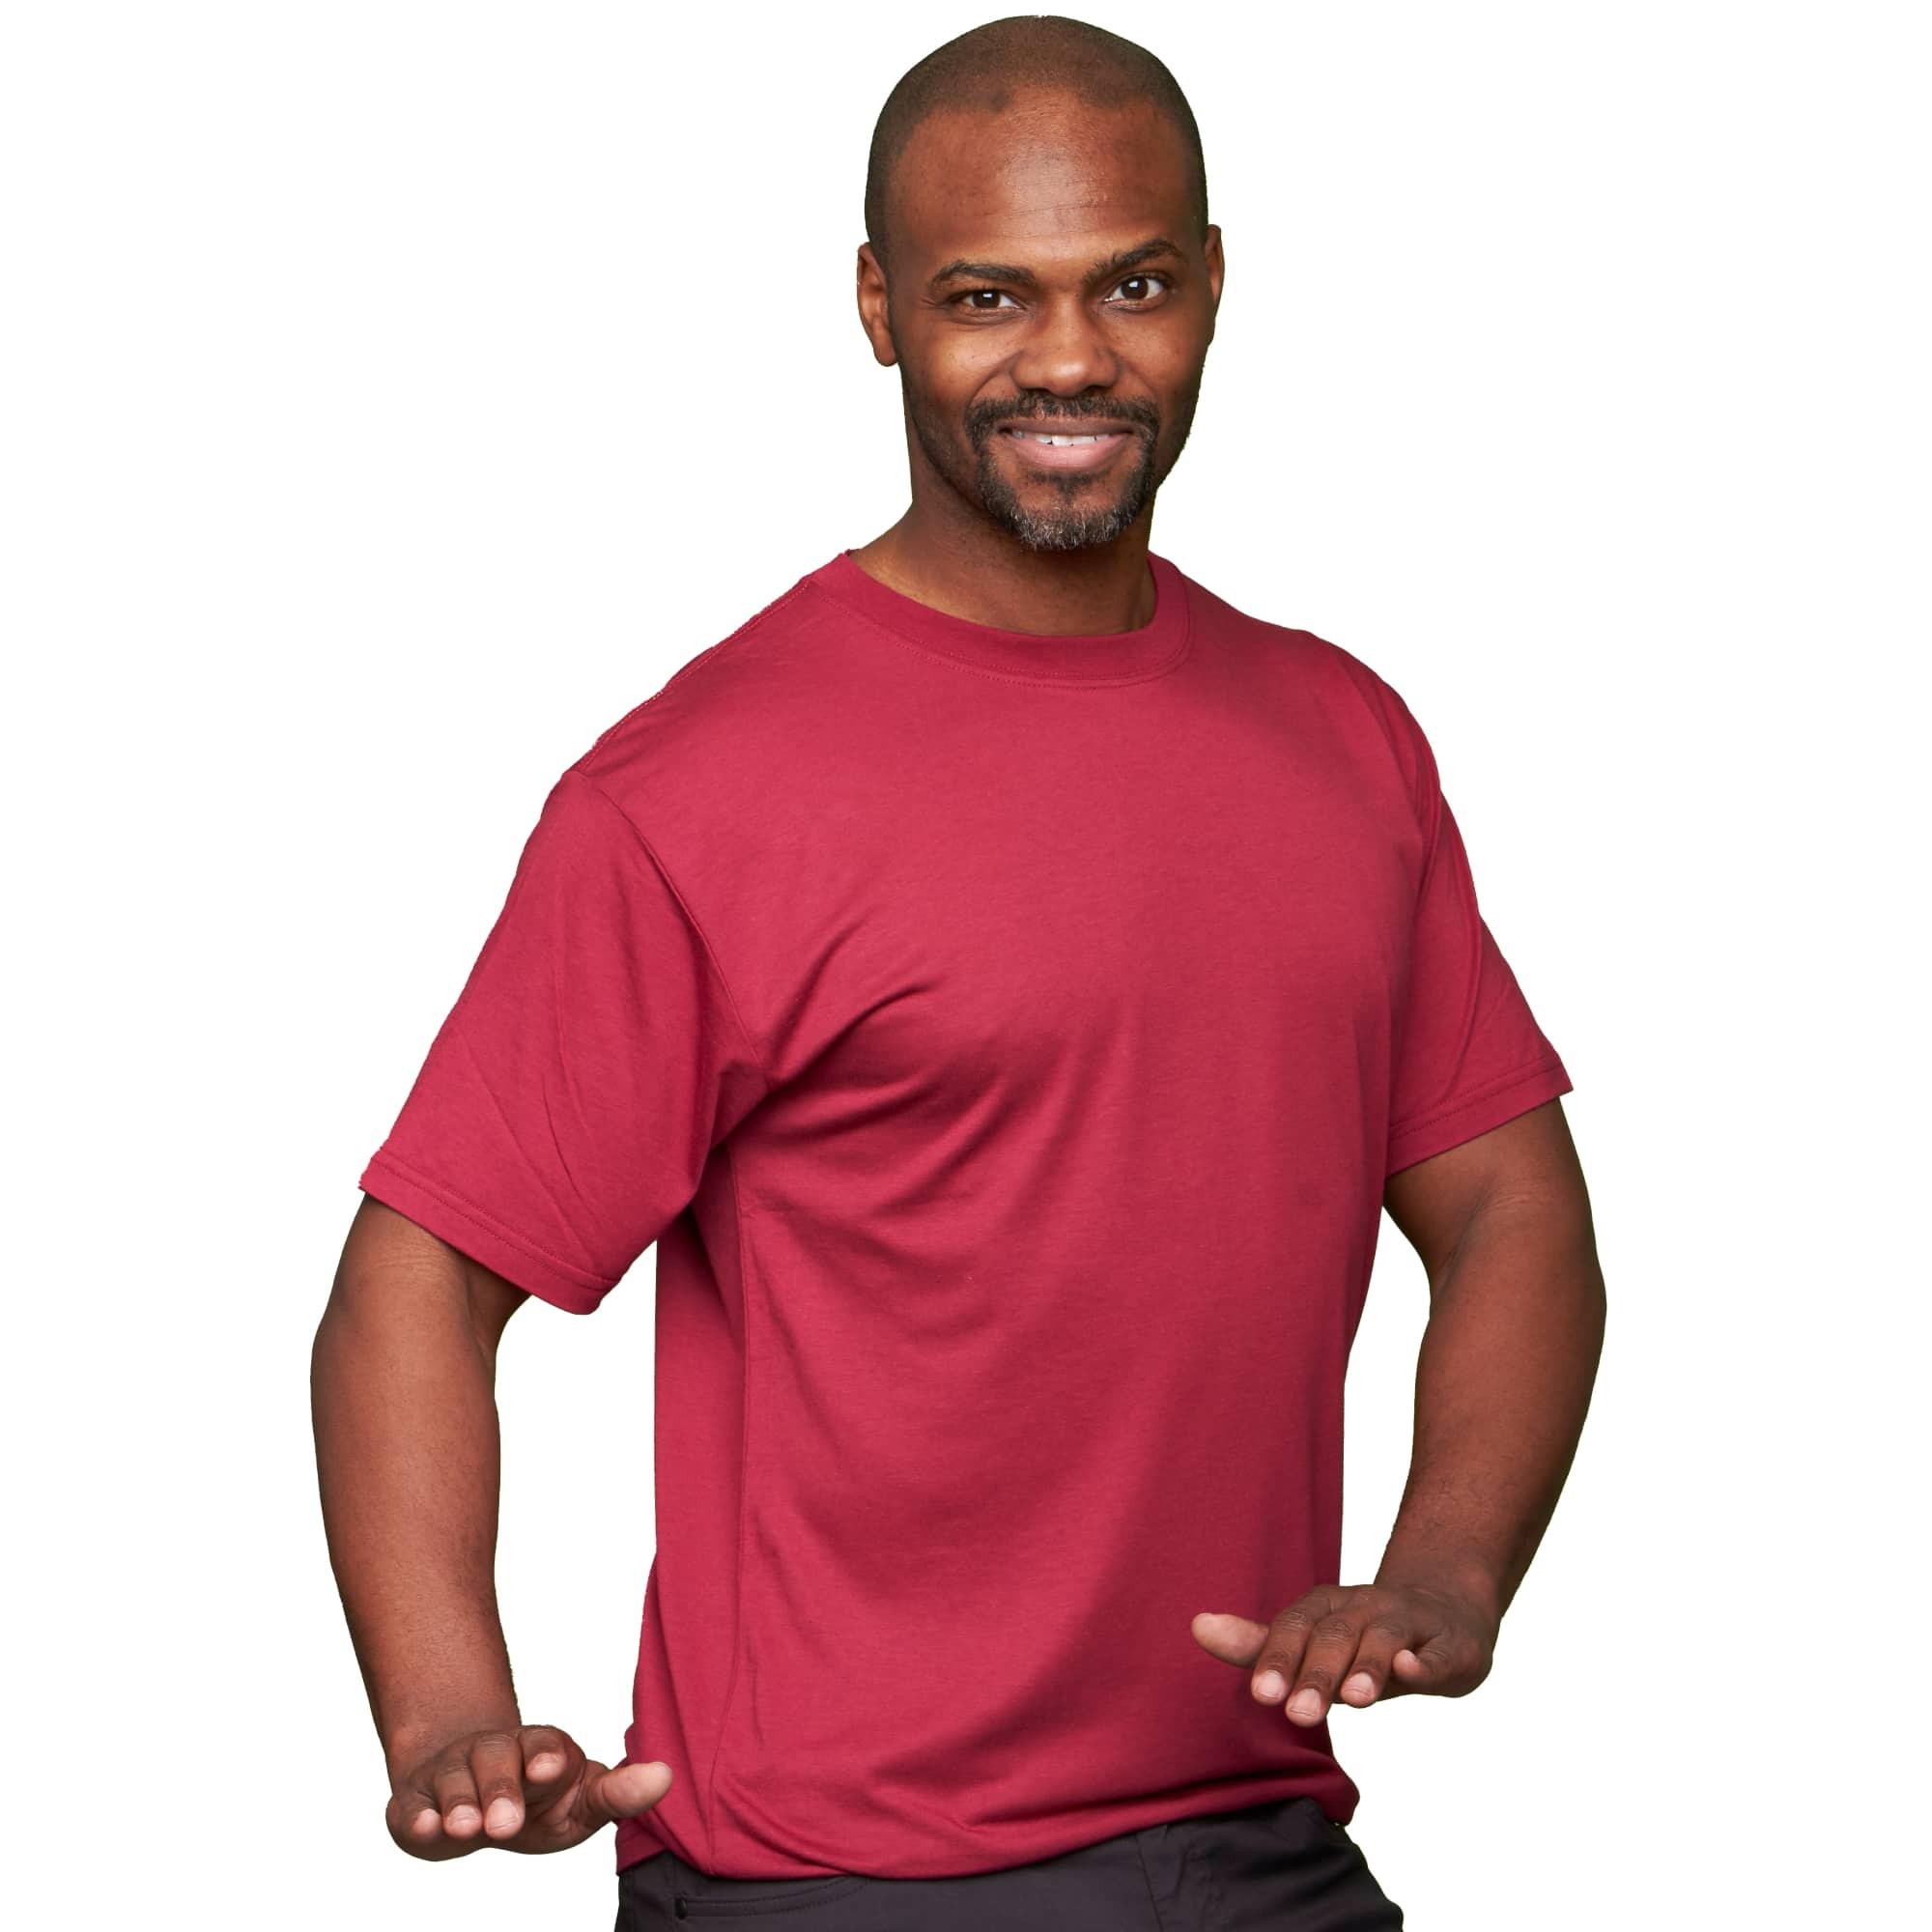 JOIN THE BIG BOY BAMBOO MENS CLOTHING AFFILIATE PROGRAM